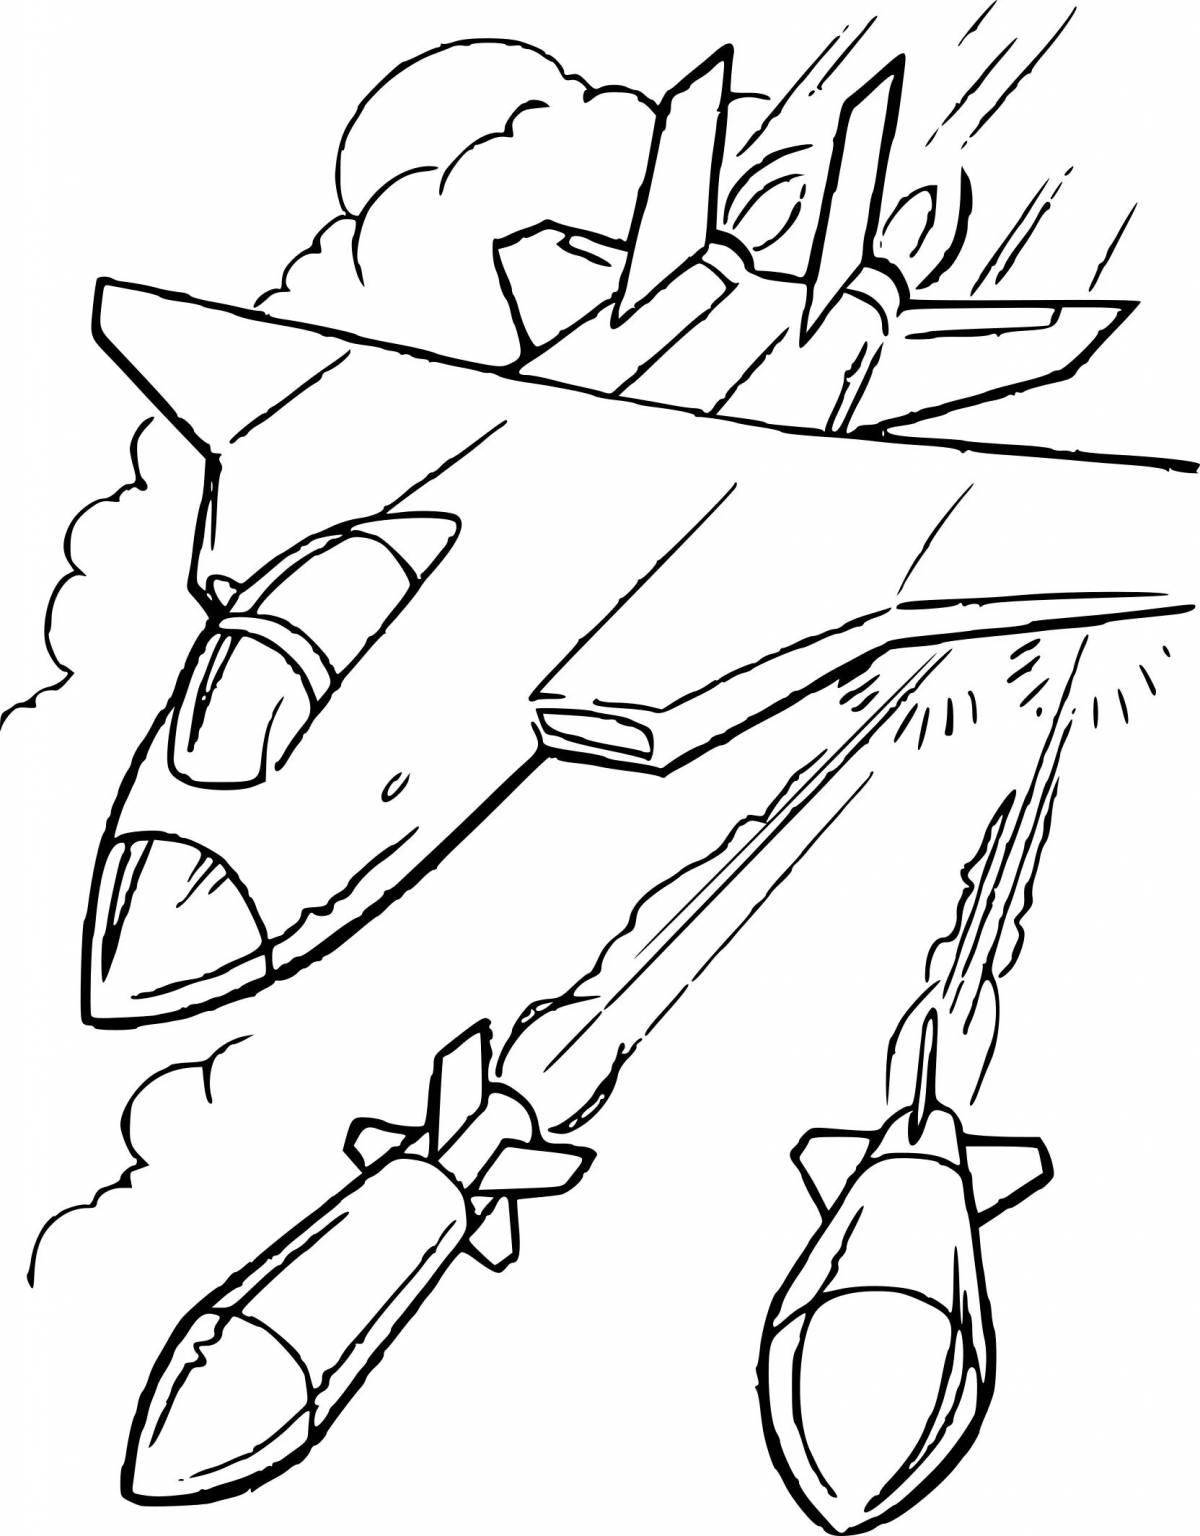 Flawless military lungs coloring book